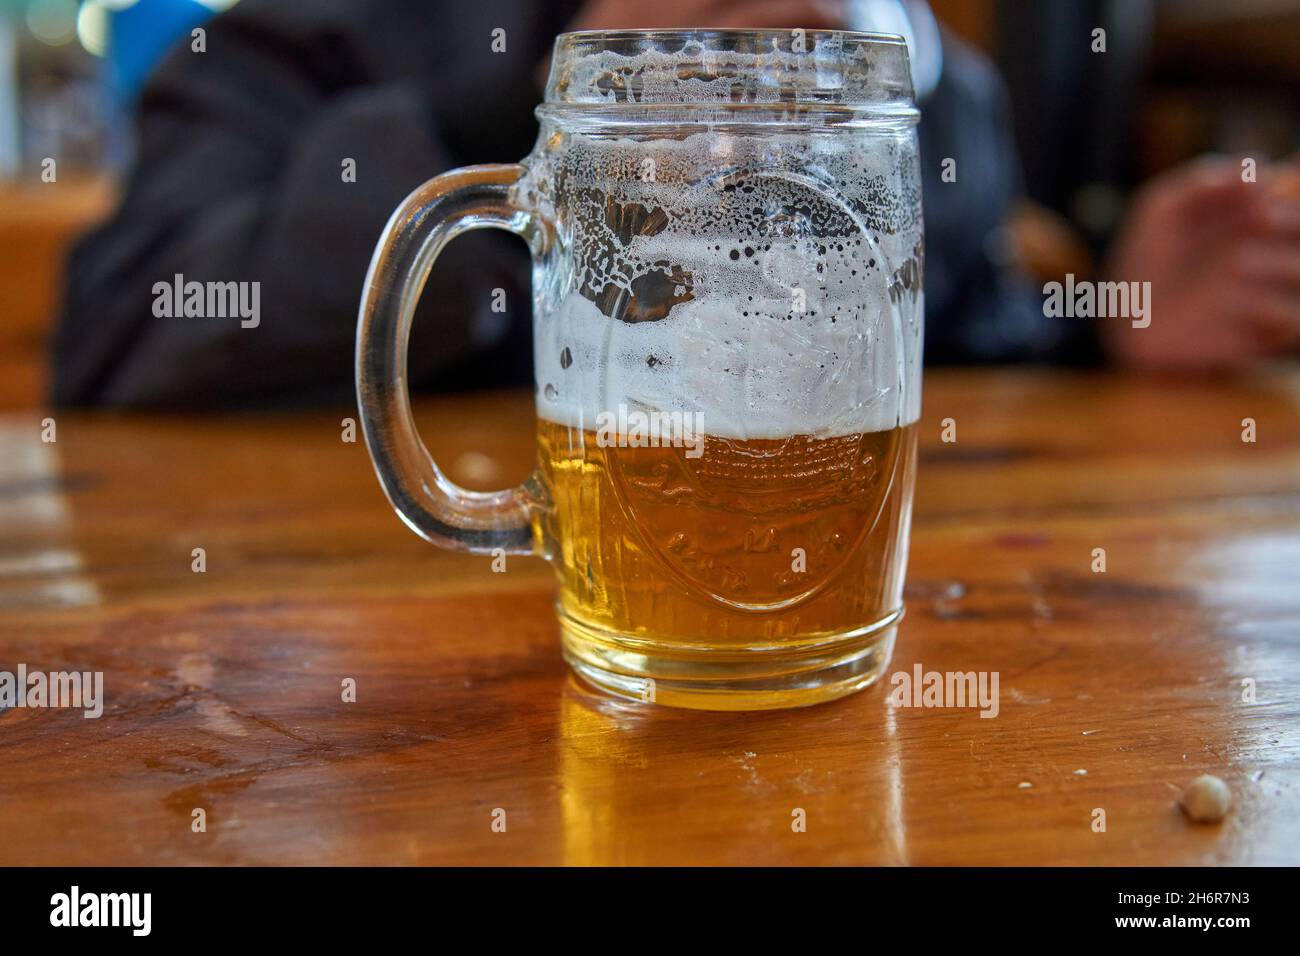 Isolated Cold honey craft beer with foam in a mug, on a wooden table. Horizontal. Blurred background Stock Photo